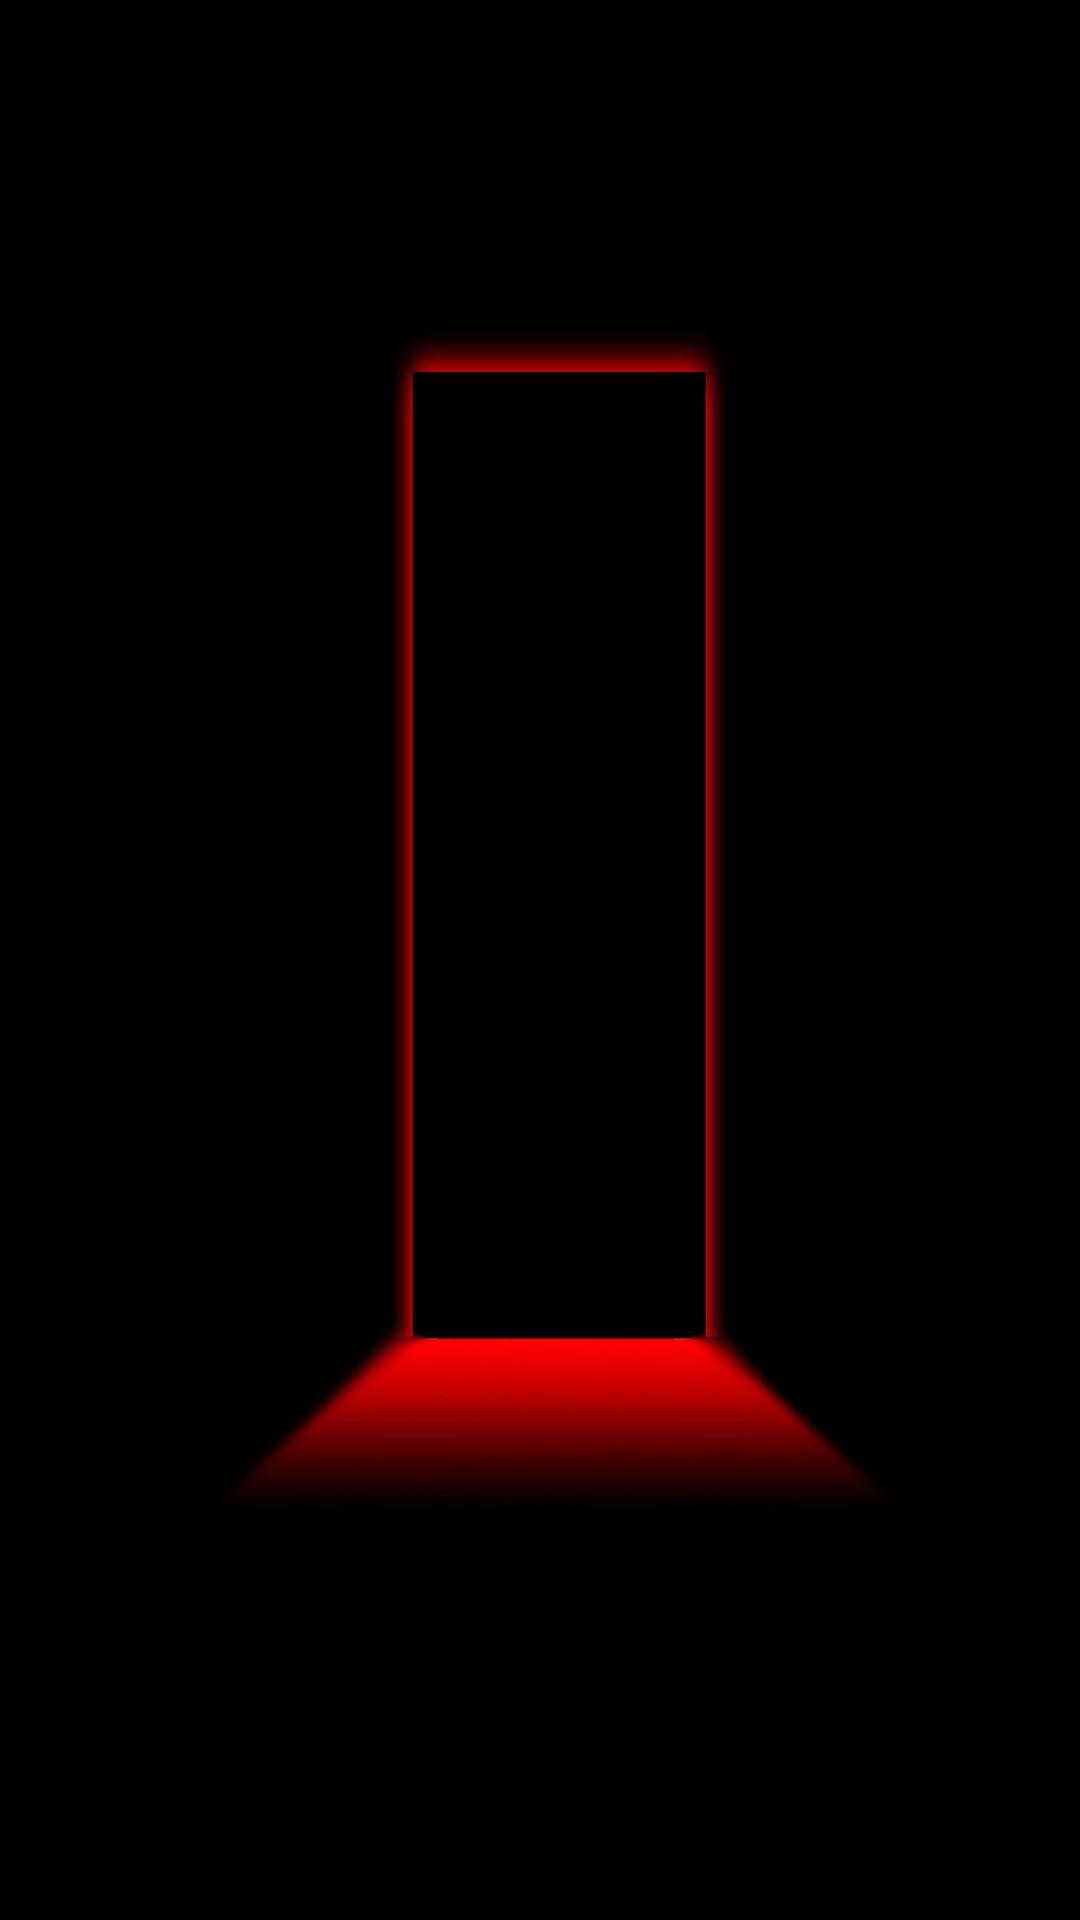 Red And Black Iphone Wallpapers Top Free Red And Black Iphone Backgrounds Wallpaperaccess